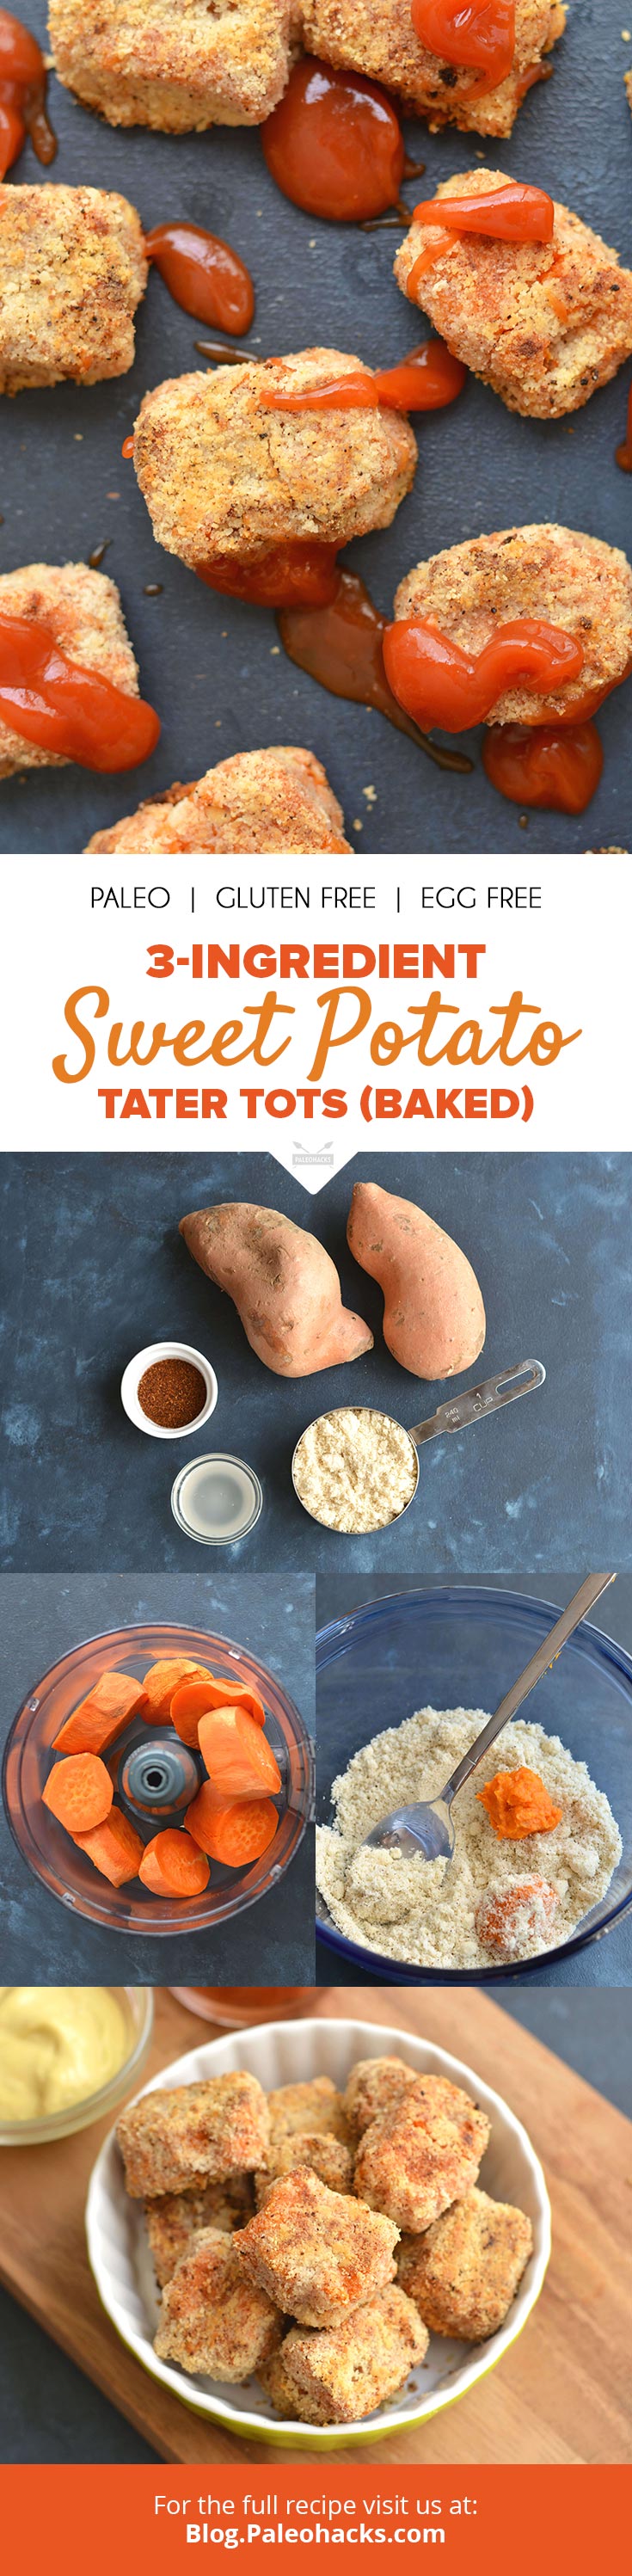 Baked, not fried, these sweet potato tater tots are crispy on the outside and creamy on the inside for a healthy, melt-in-your-mouth snack!